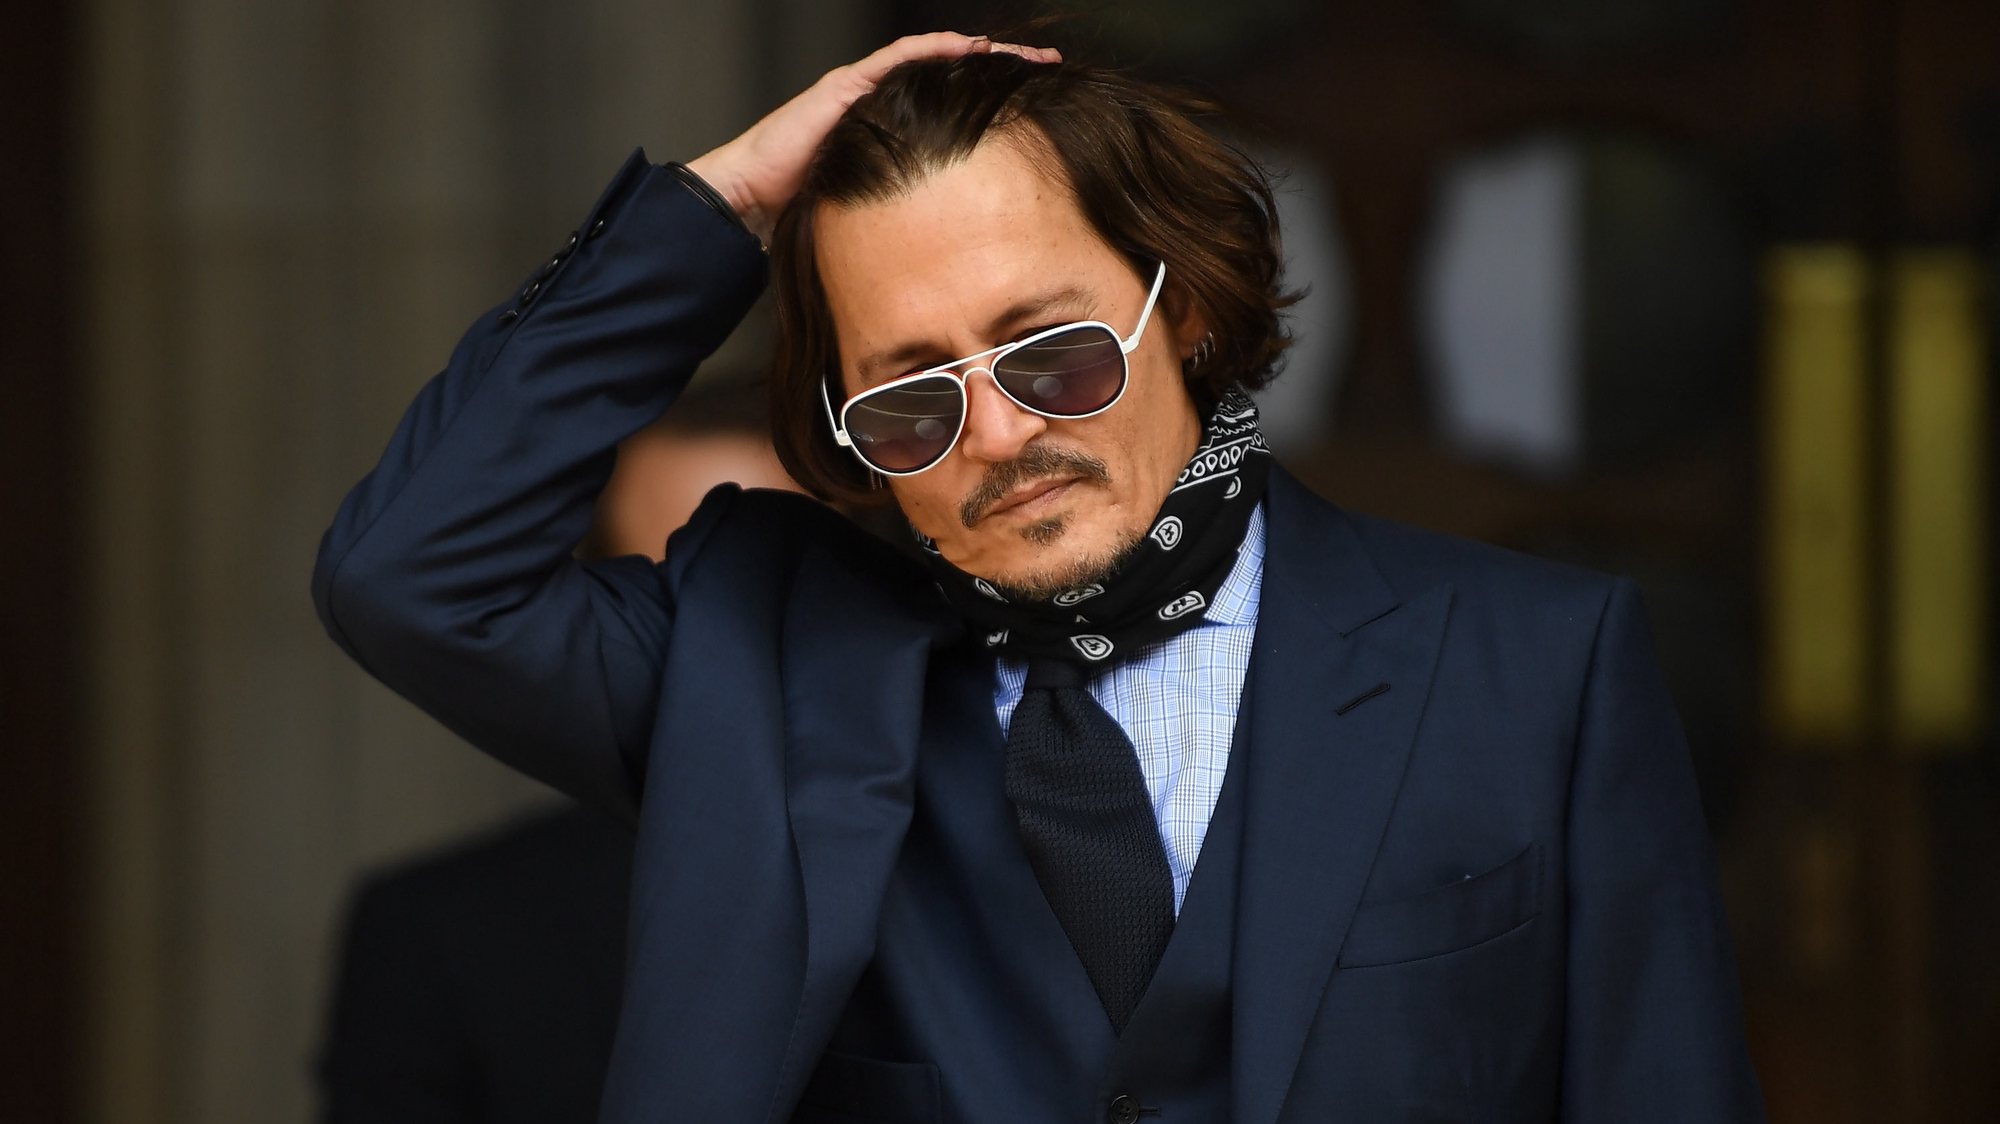 epa08792649 (FILE) - US actor Johnny Depp arrives at the Royal Courts of Justice in London, Britain, 14 July 2020 (reissued 02 November 2020). The UK High Court ruled against Depp in his libel trial against The Sun&#039;s newspaper publisher News Group Newspapers (NGN) over claims he abused his ex-wife, US actress Amber Heard, media reports state on 02 November 2020.  EPA/NEIL HALL *** Local Caption *** 56213511